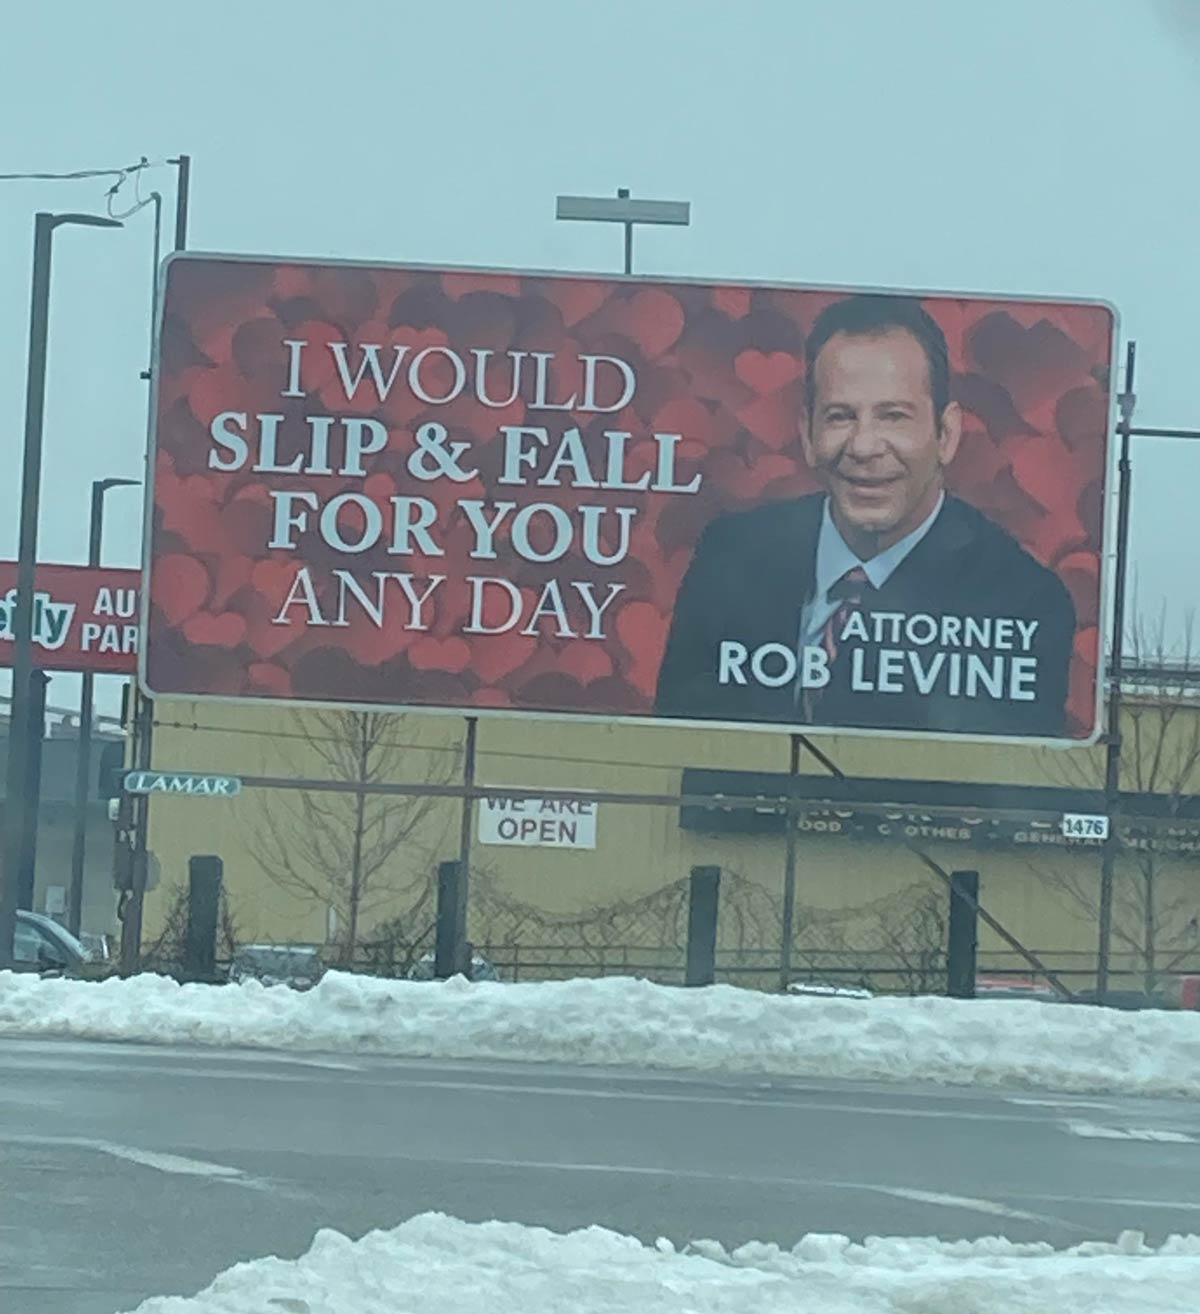 Local lawyer's billboard is ready for Valentine’s Day